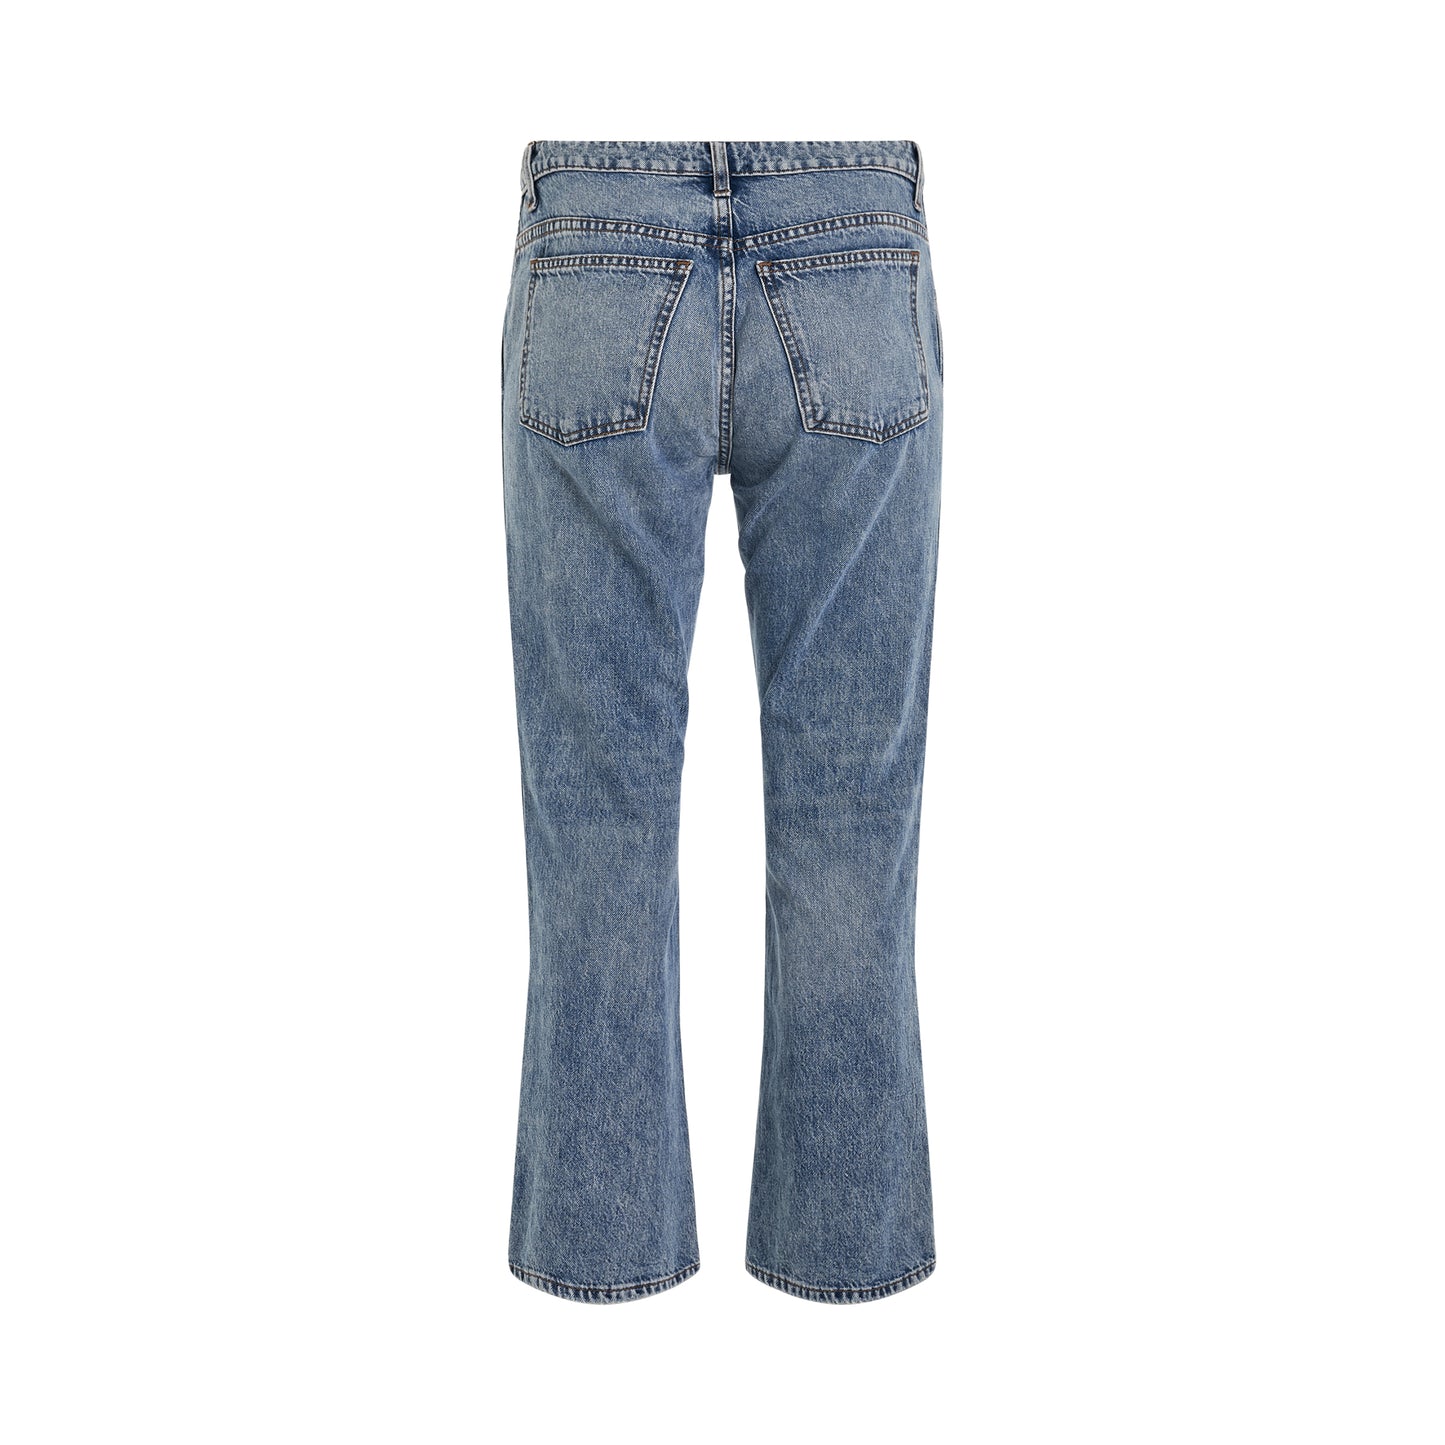 Vivian Bootcut Flare Jeans in Bryc